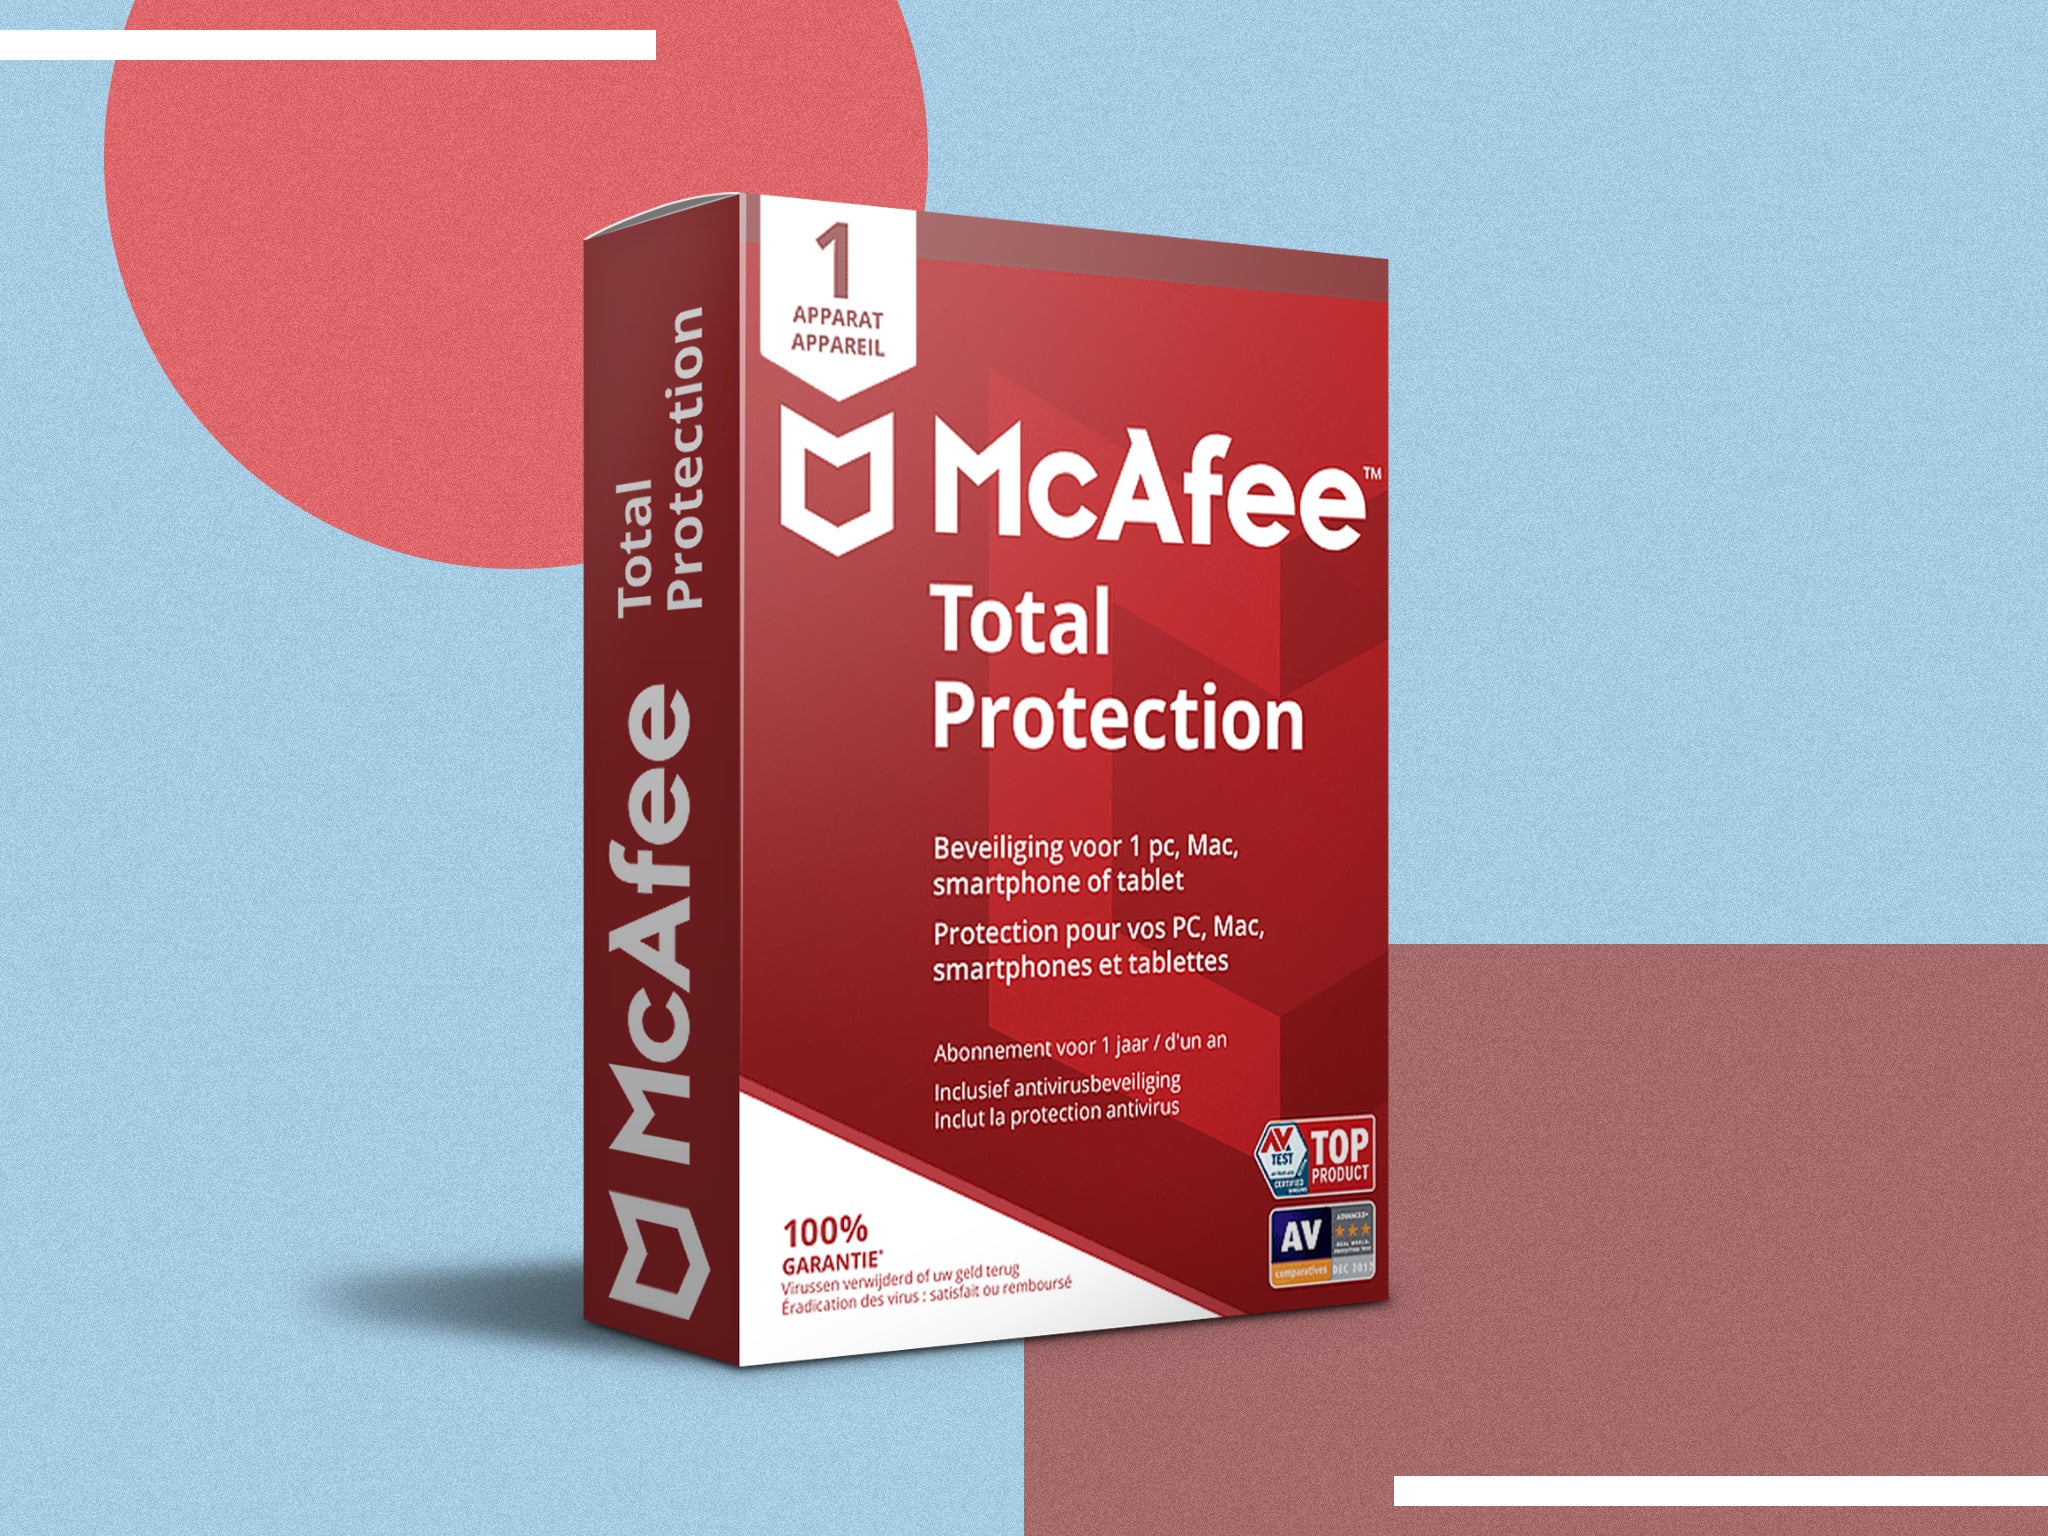 mcafee-total-protection-review-2021-antivirus-and-security-software